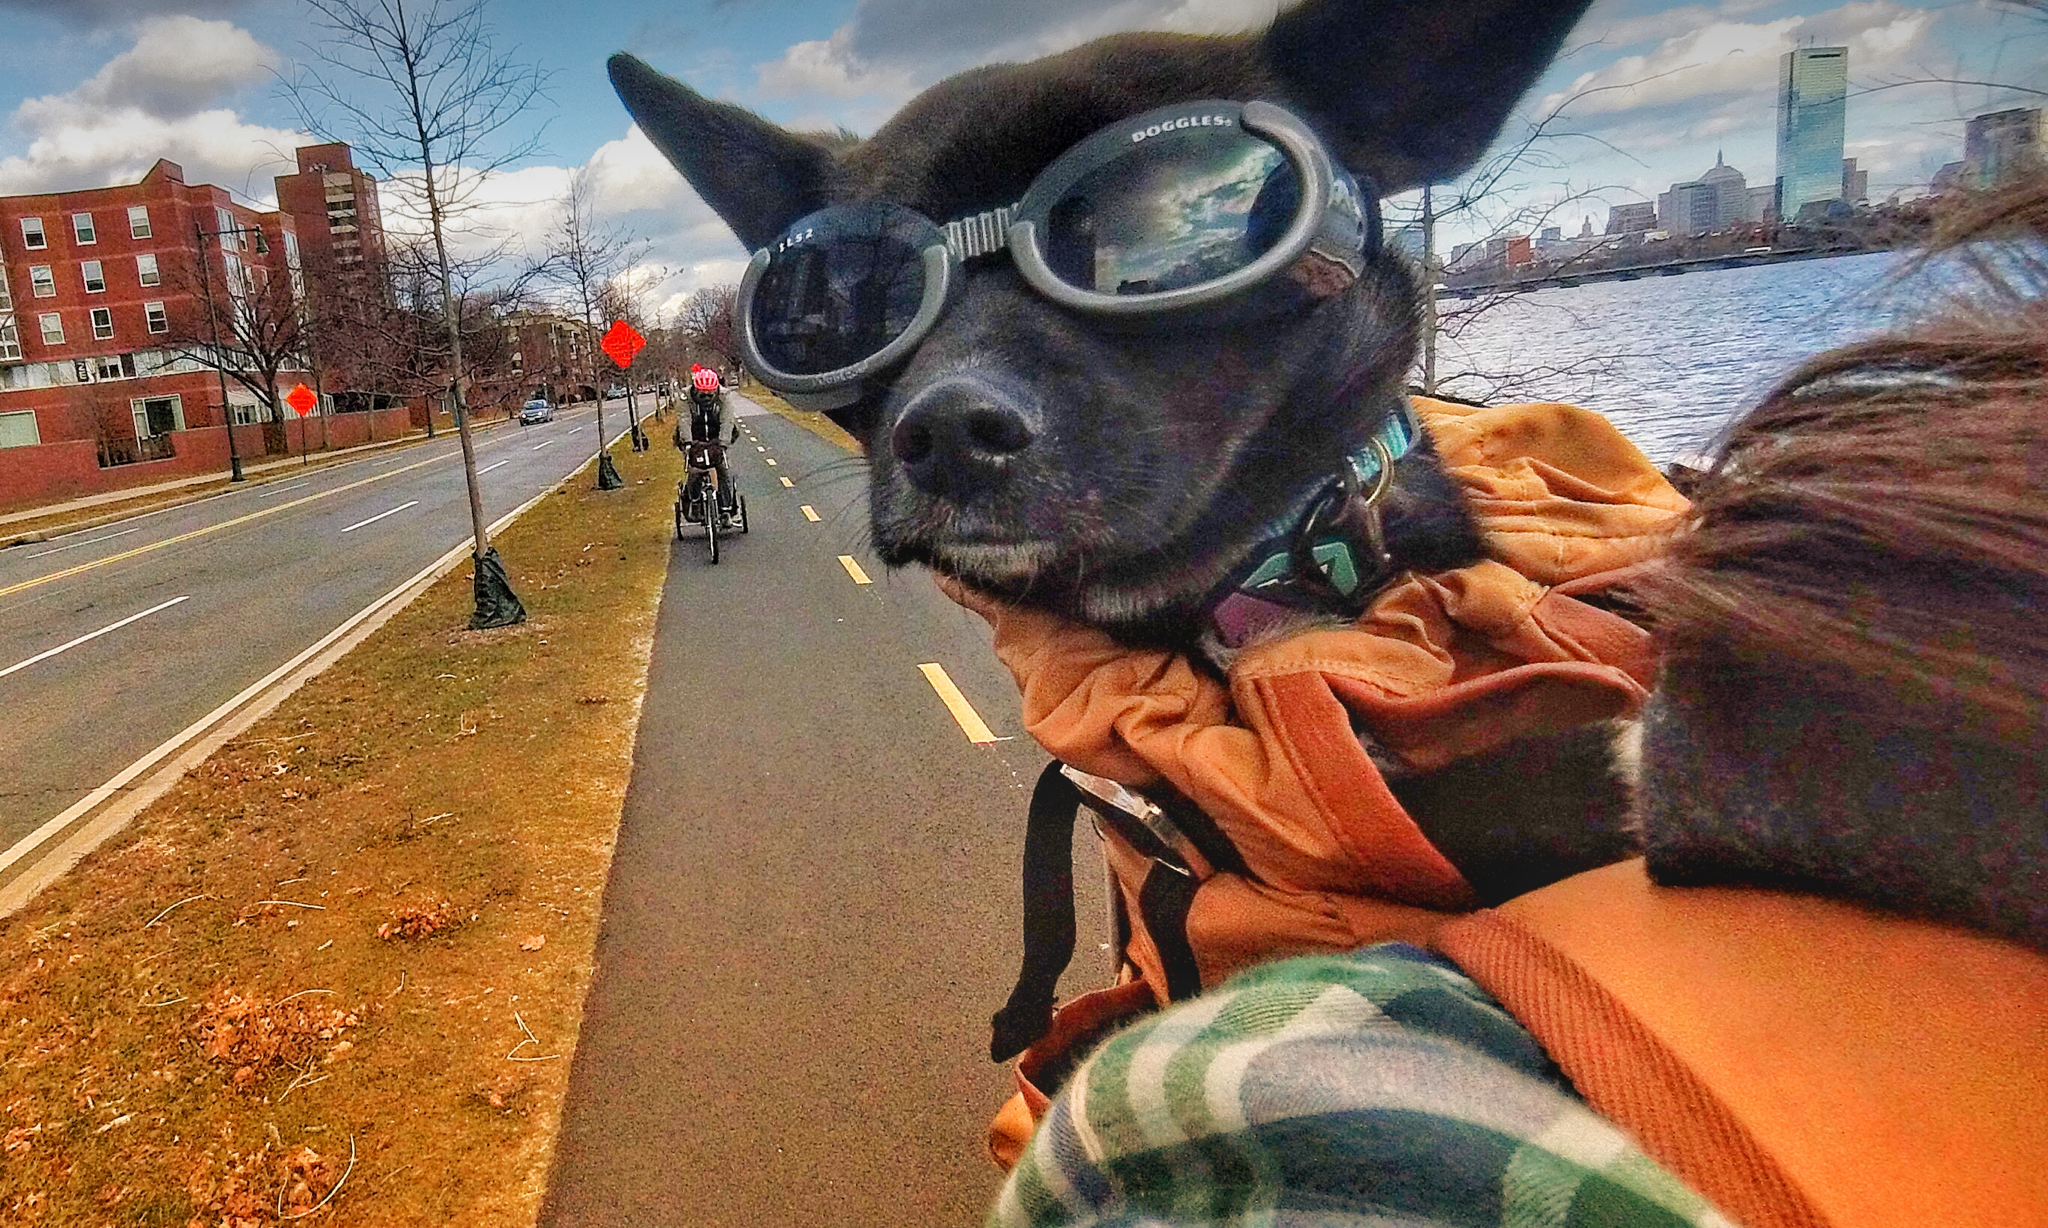 A dog named Watson sits on his owner's back while she rides a bike on a city street